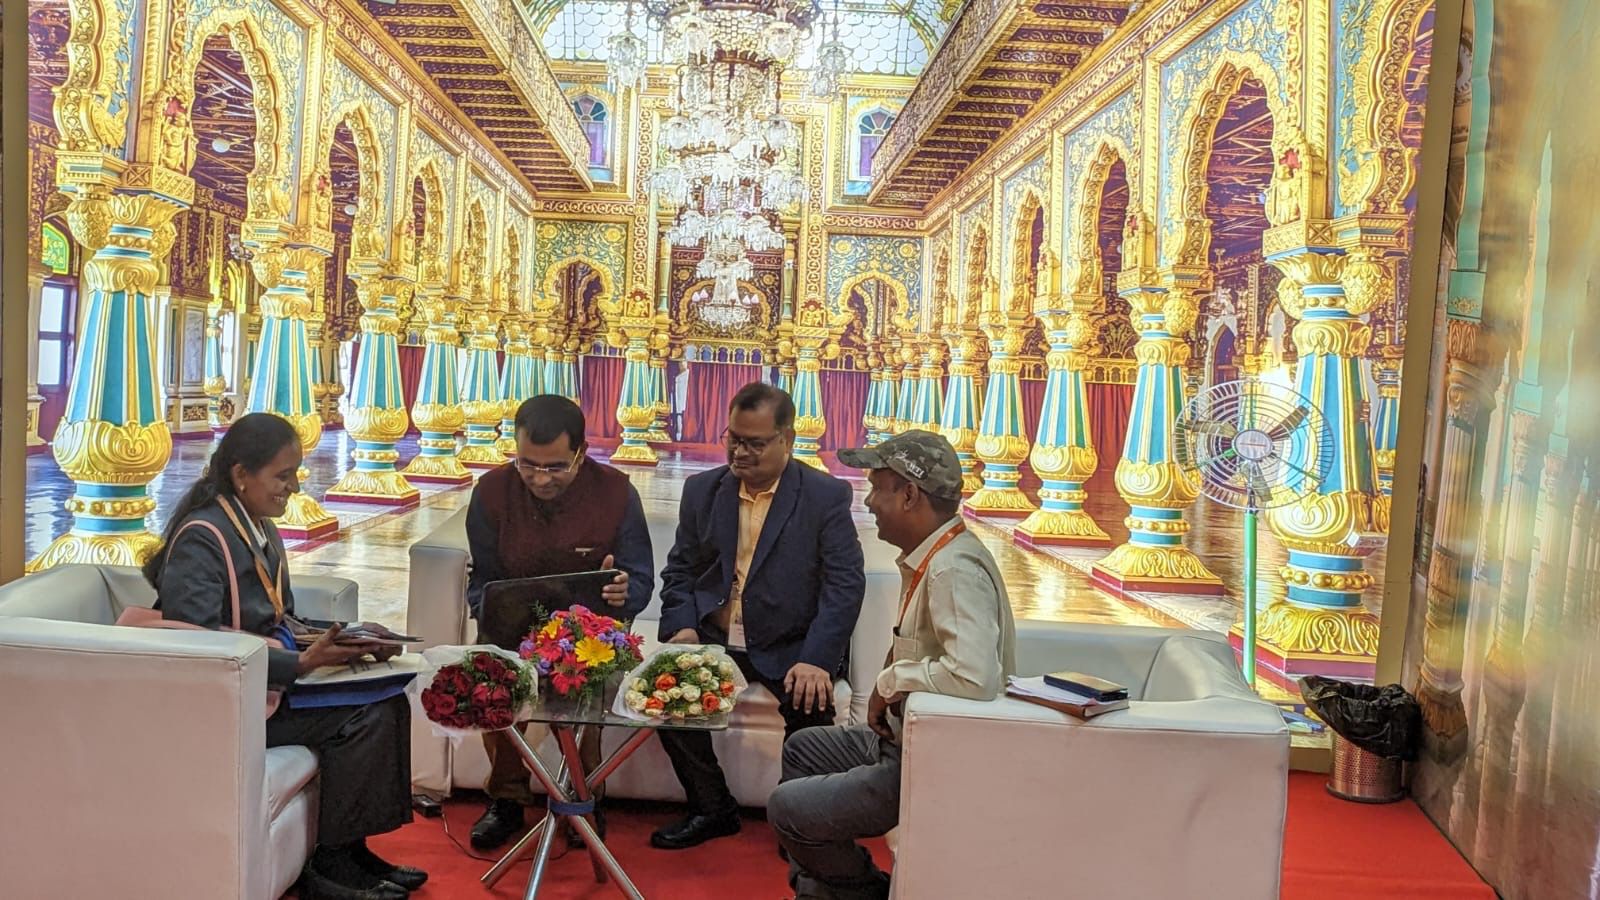 Karnataka Tourism showcased its offerings at the IITM Chennai 2023, held from August 4th to 6th, 2023.